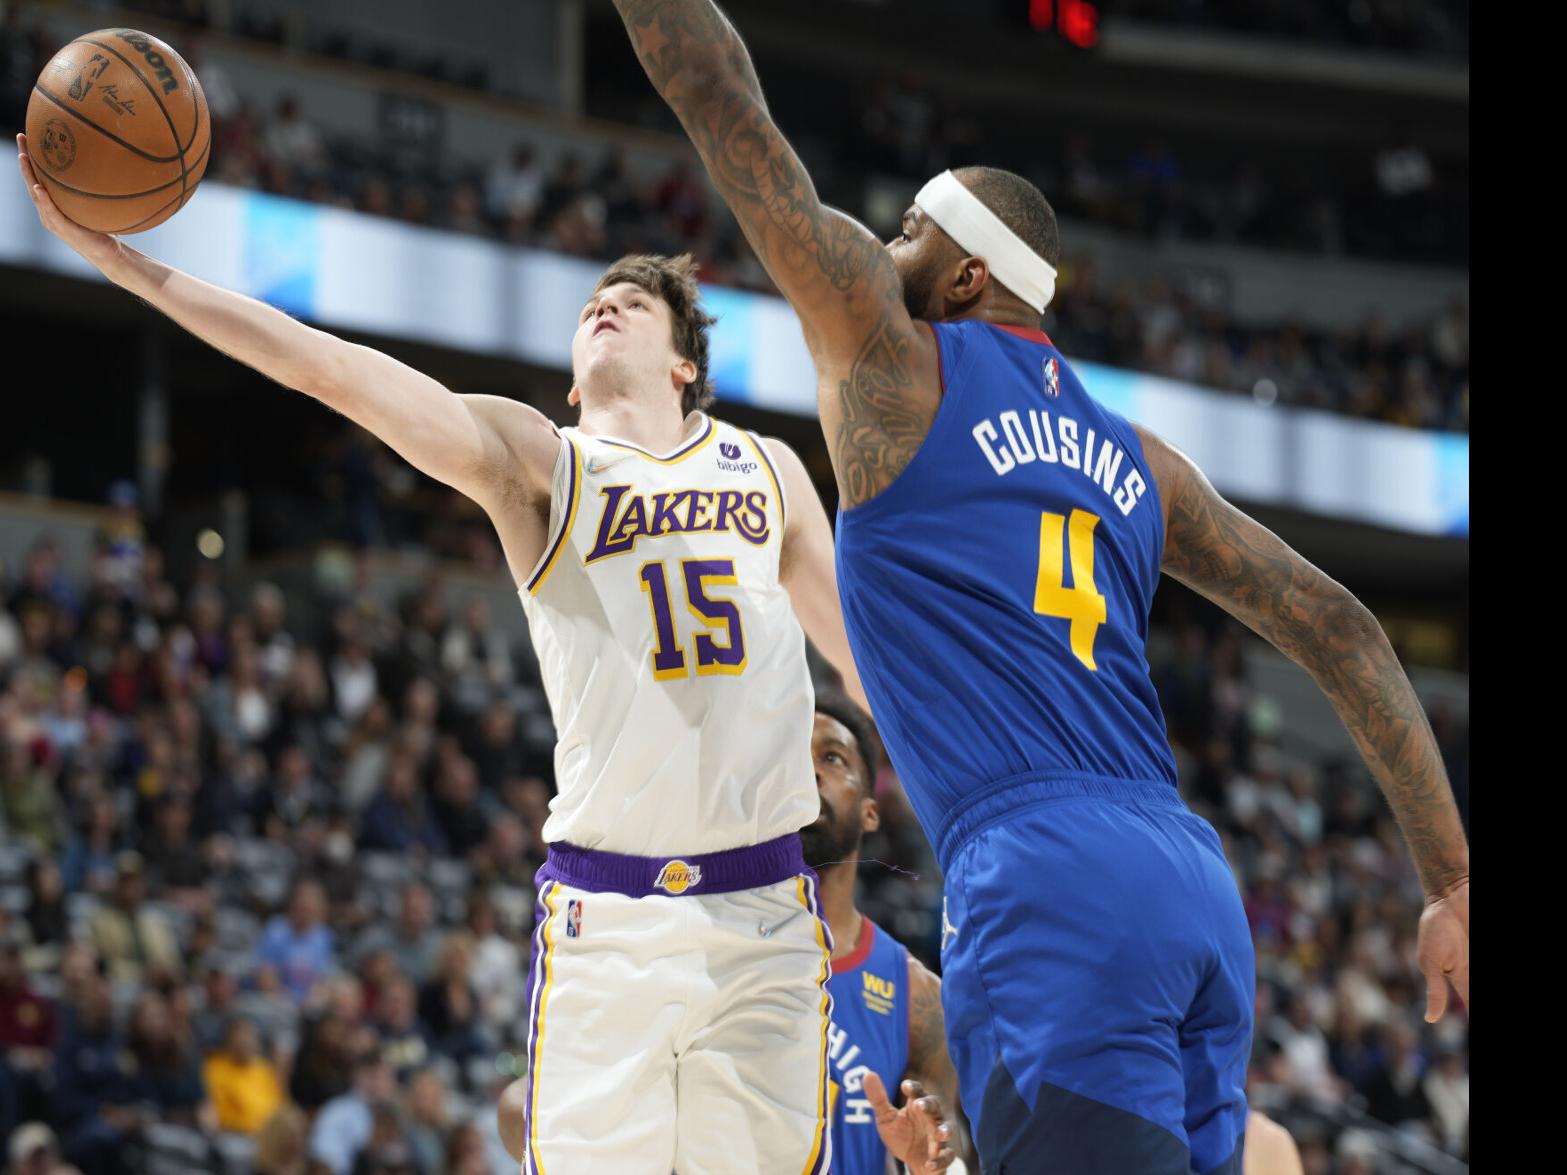 Lakers' Austin Reaves provides insight on guarding Steph Curry